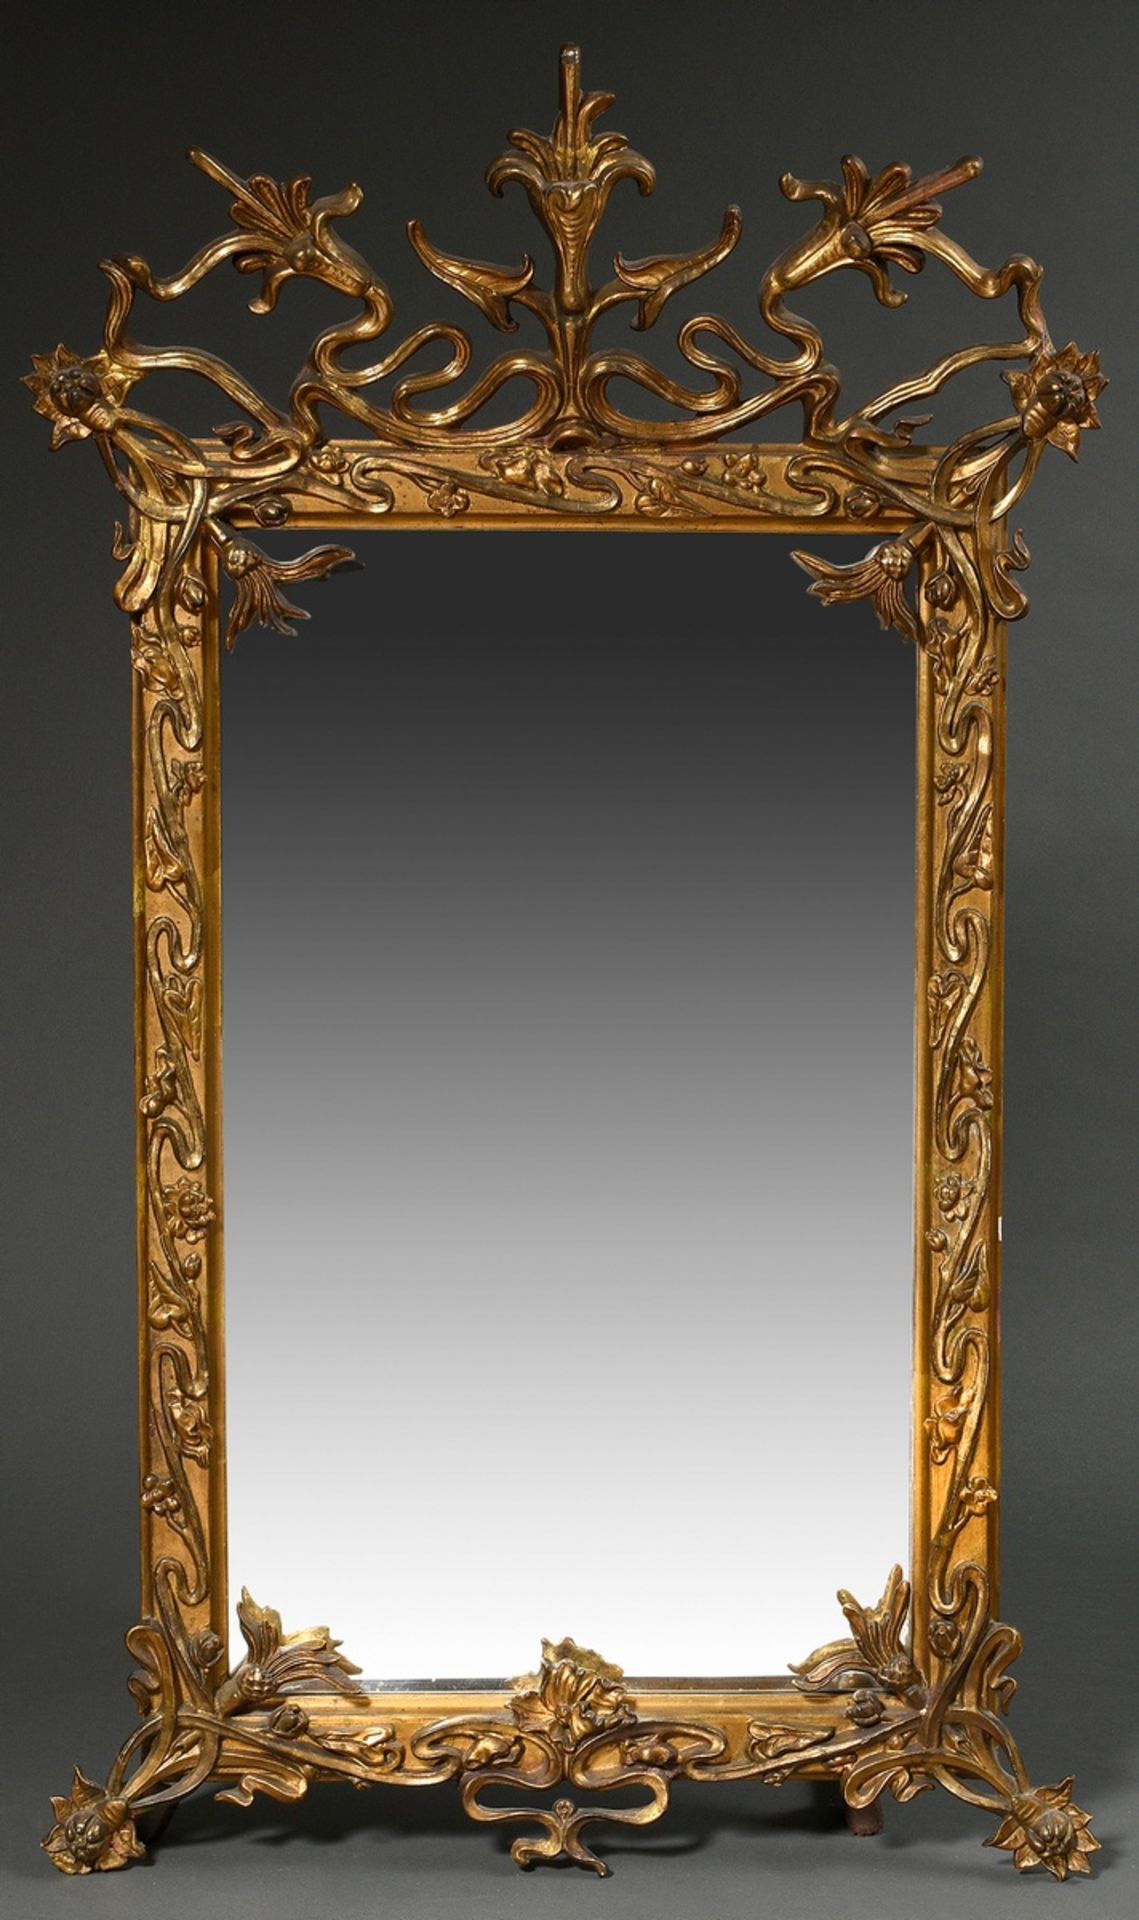 Art Nouveau console mirror with plastic floral frame "Thistles and water lilies", wood and stucco g